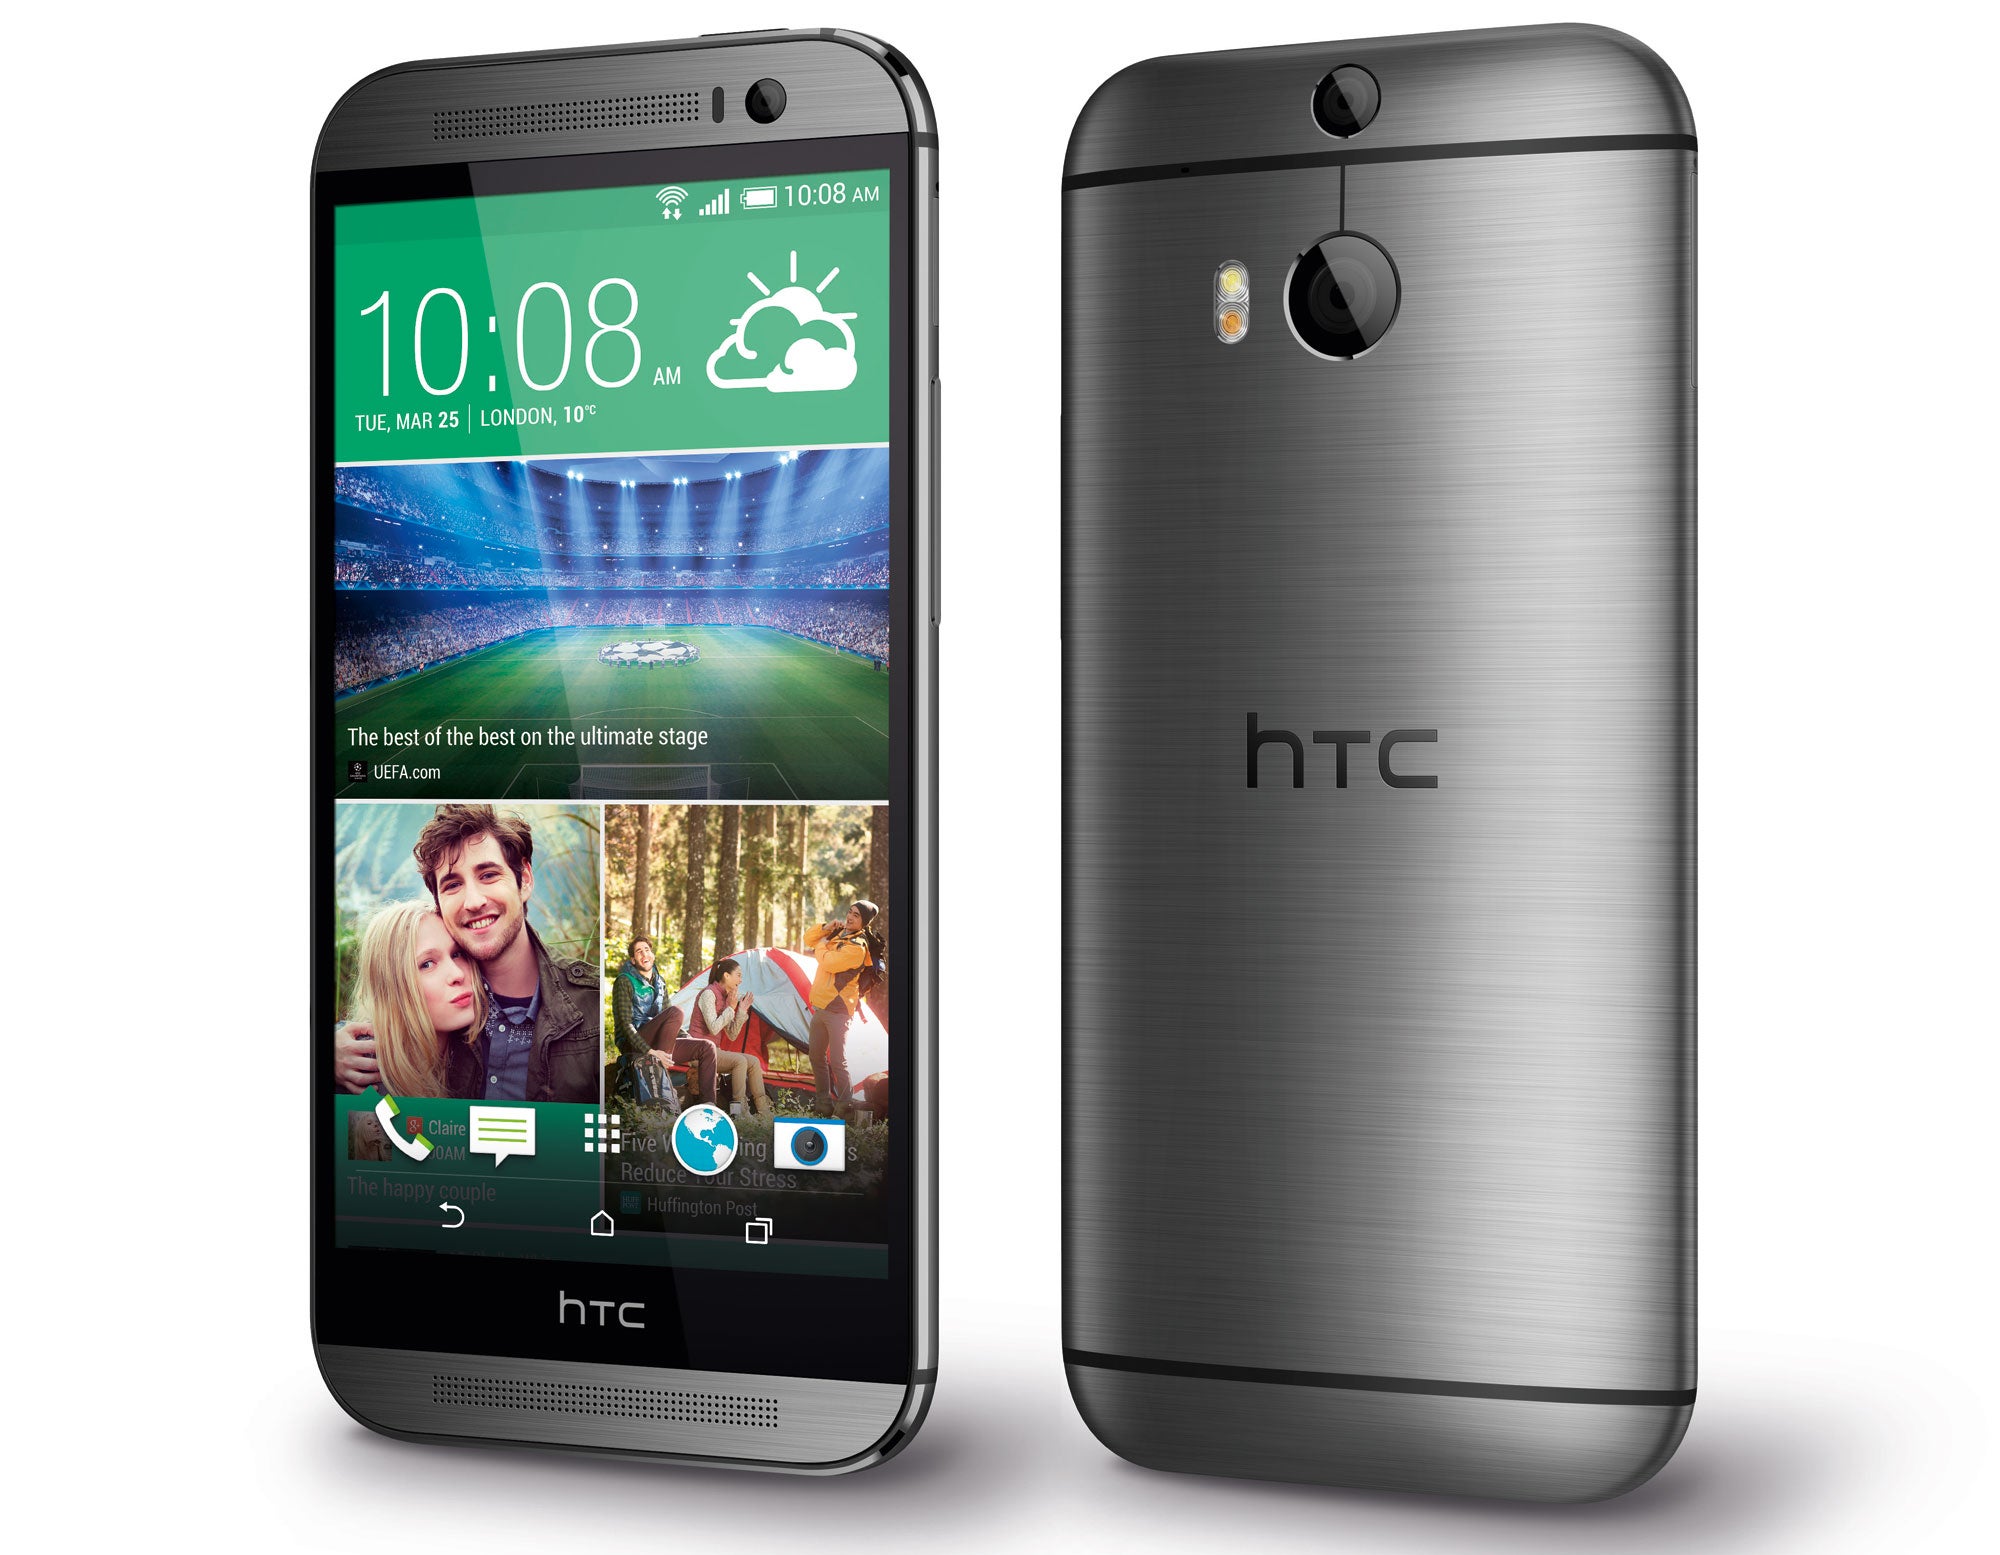 The HTC One M8 comes in Gun Metal (pictured), Gold and Silver